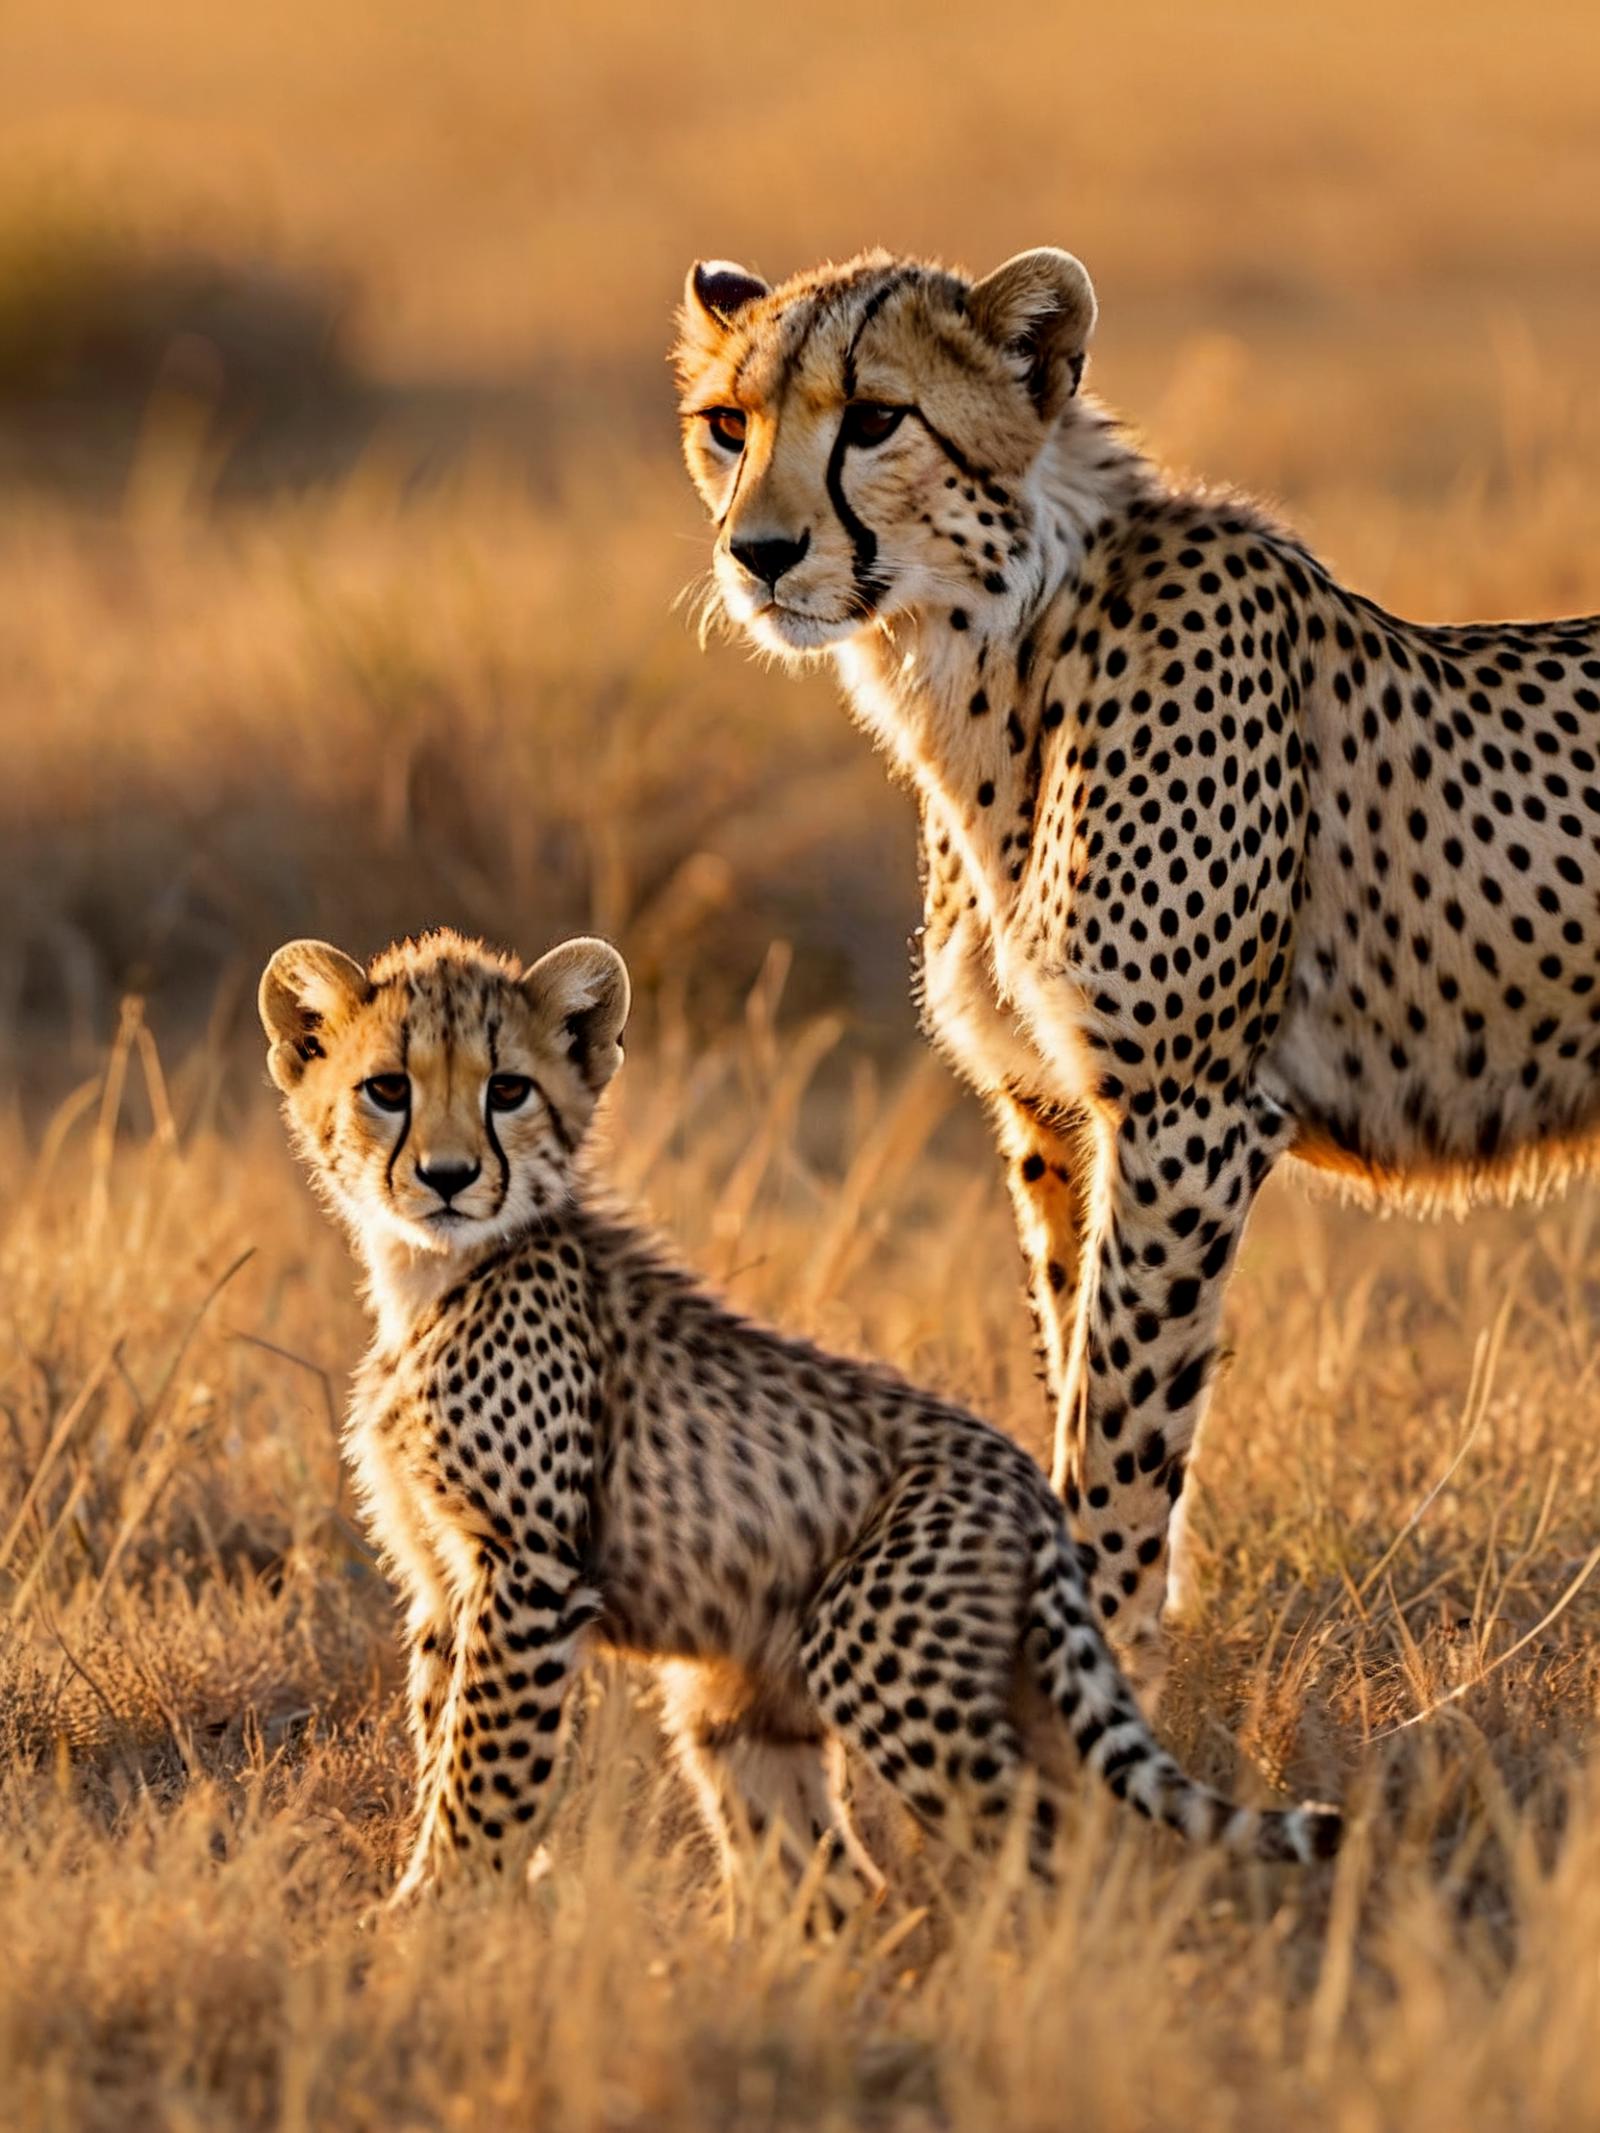 Two Cheetahs Standing Together in a Field